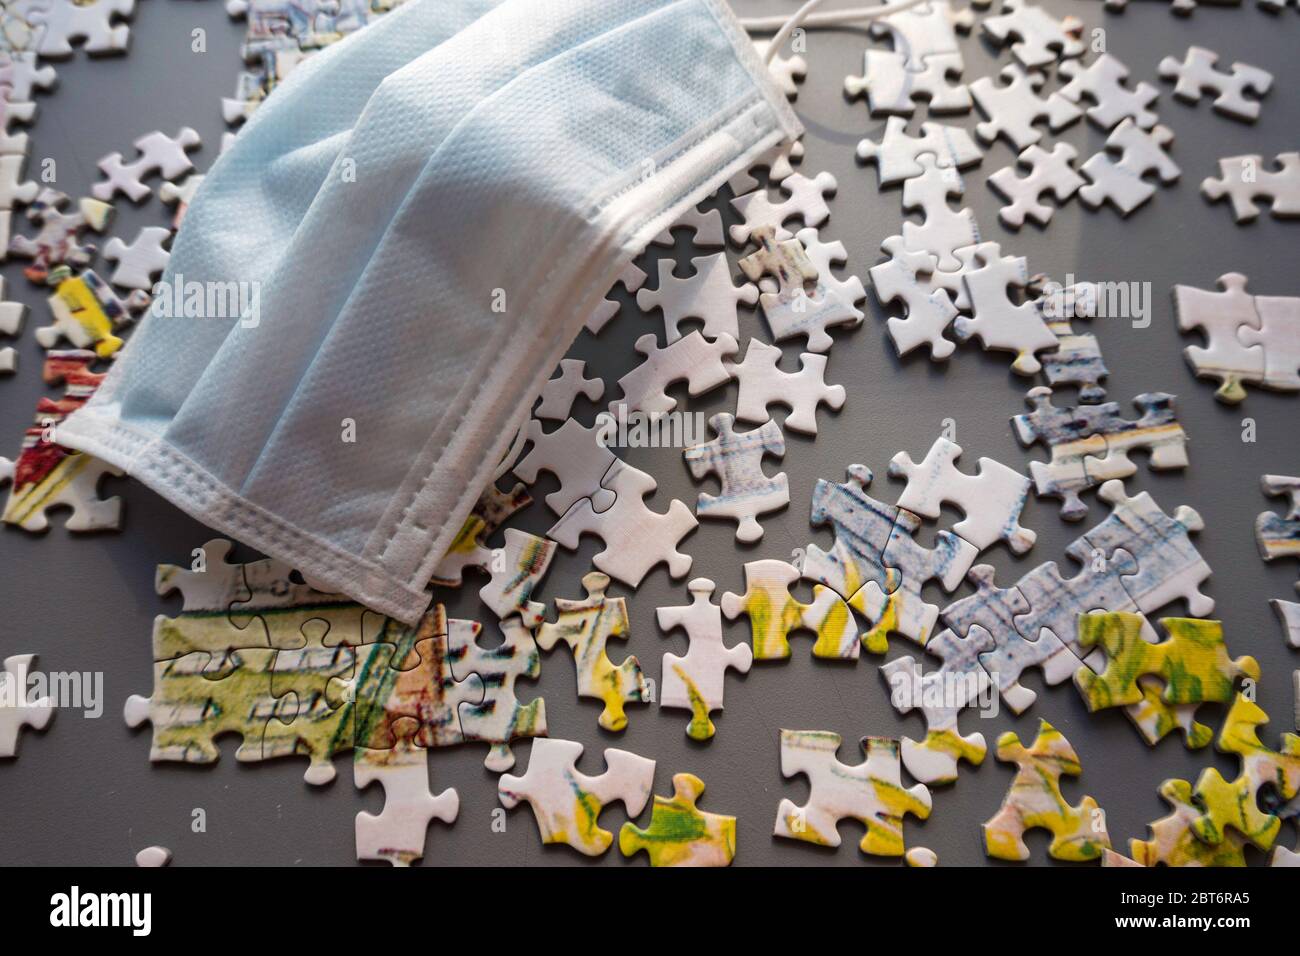 Jigsaw puzzles are a popular pastime during the corona virus lockdown in the United States Stock Photo